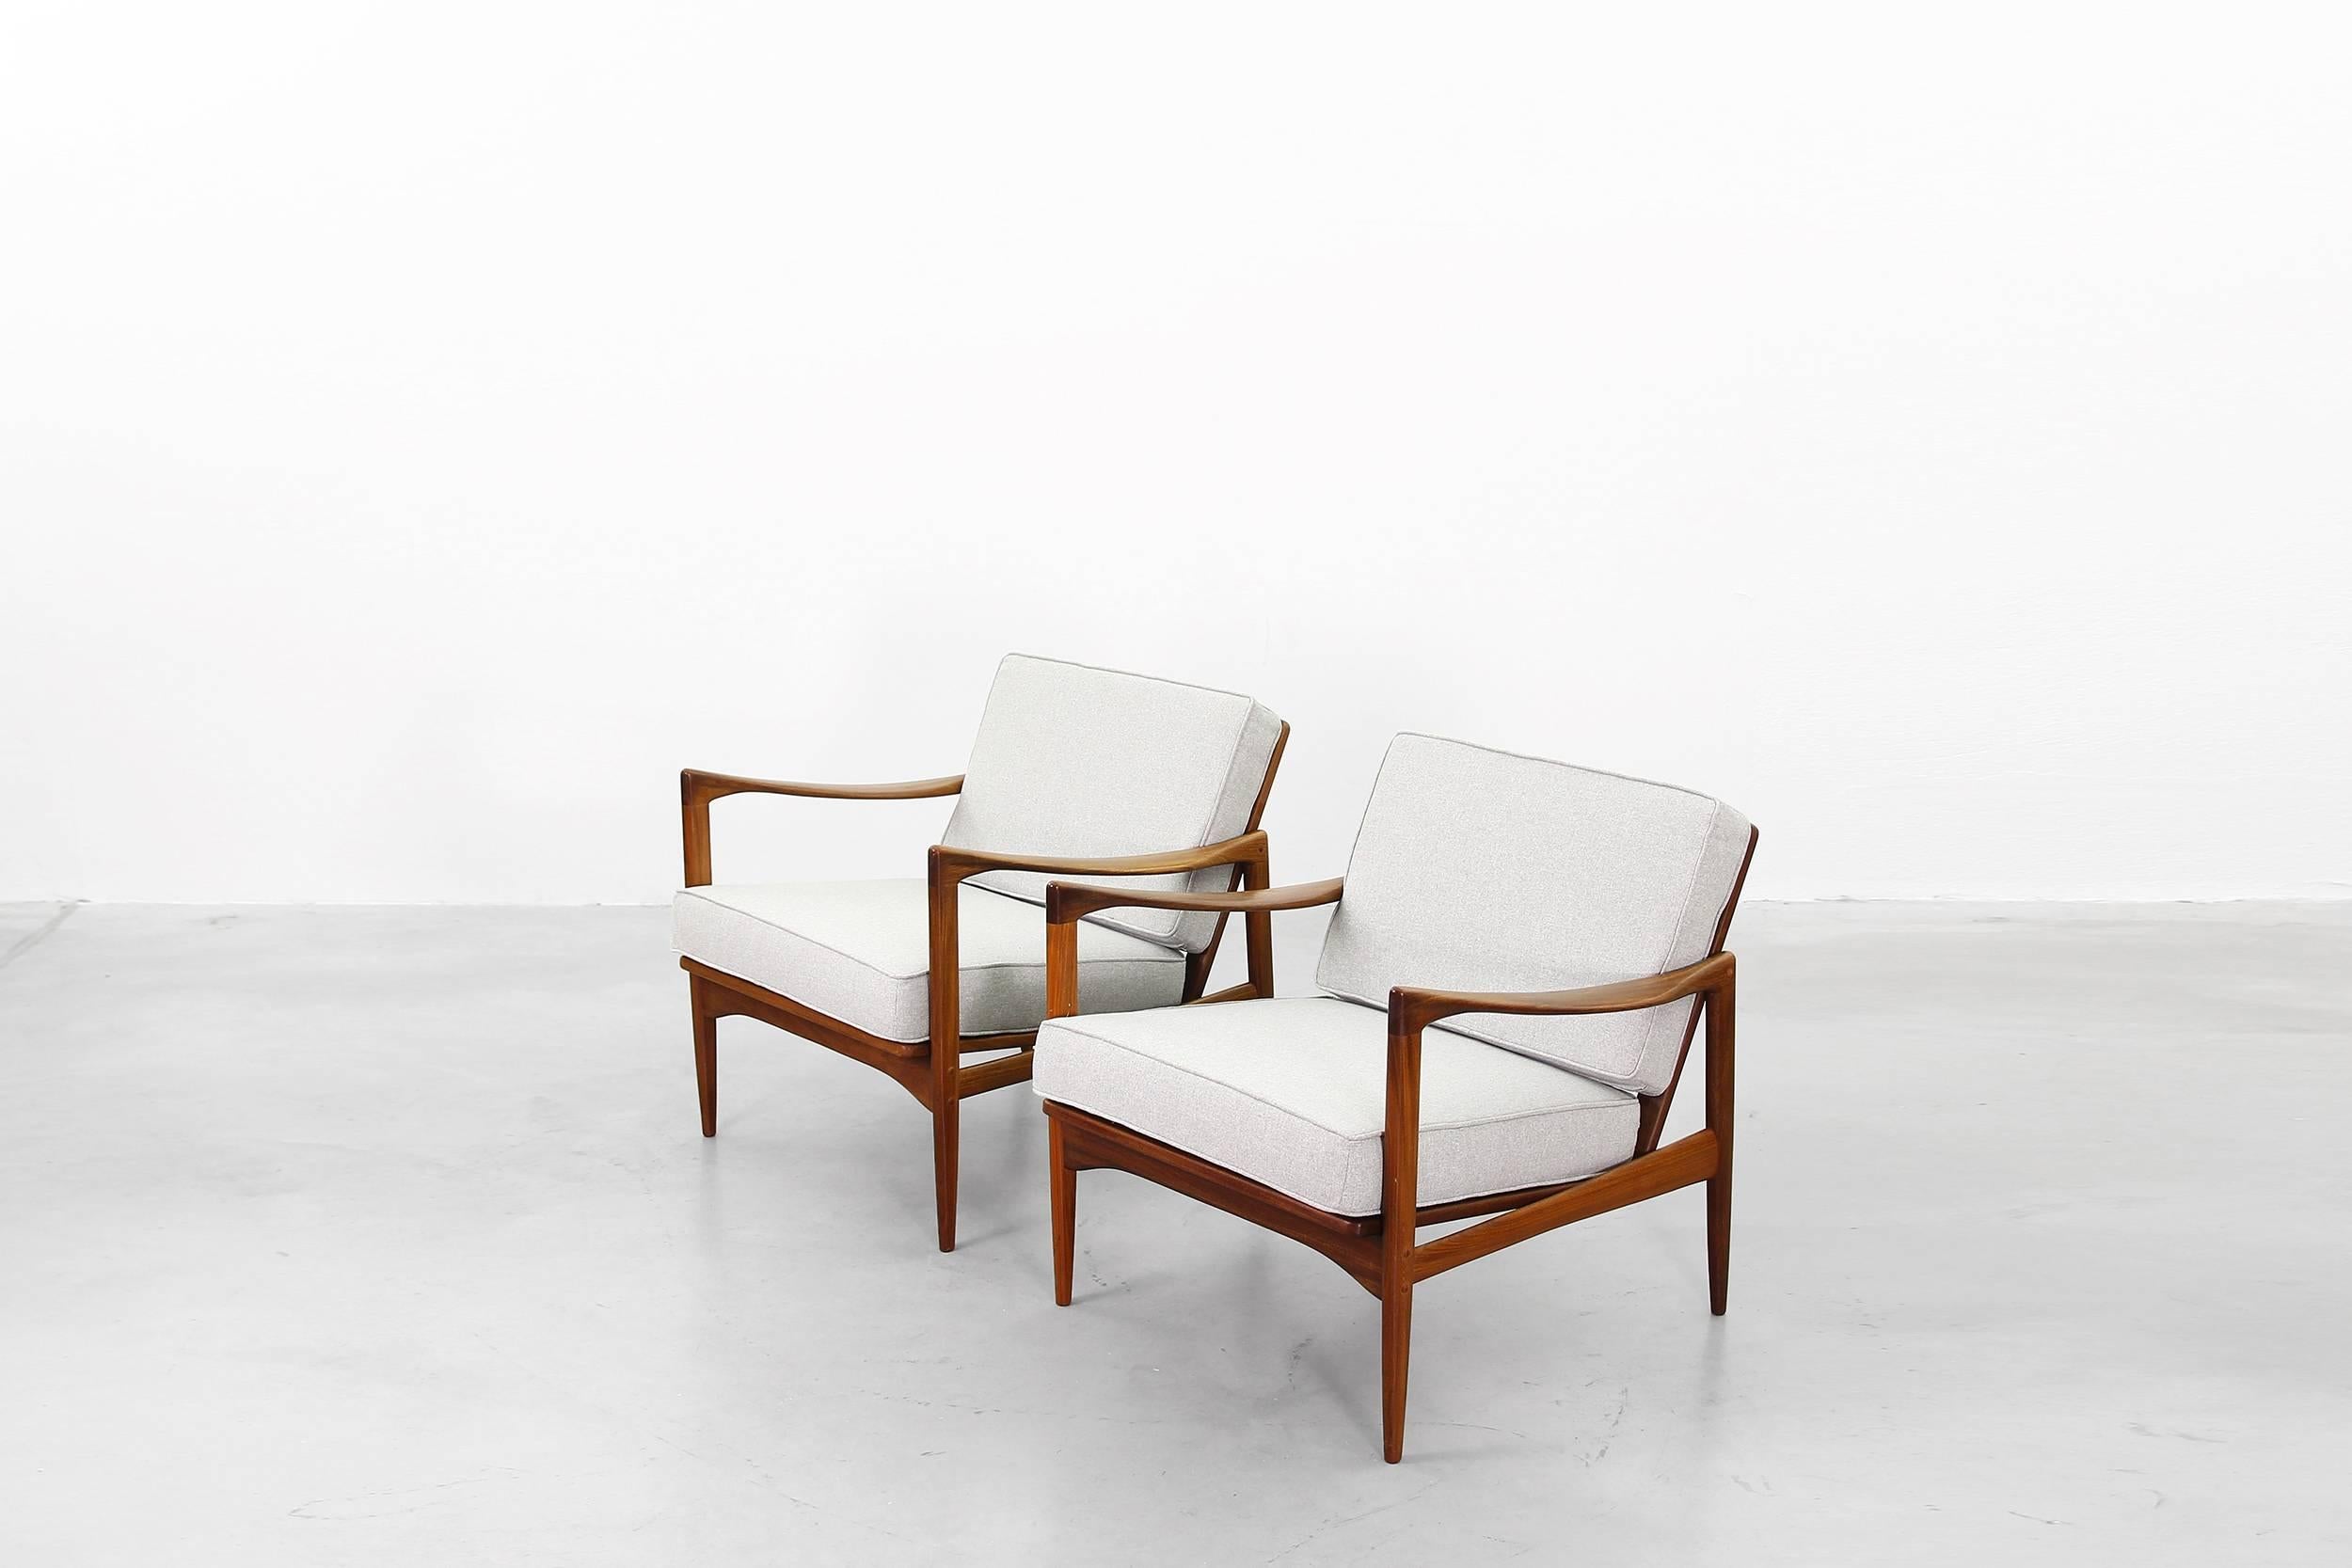 20th Century Pair of Lounge Chairs by Ib Kofod-Larsen for OPE, Newly Reupholstered